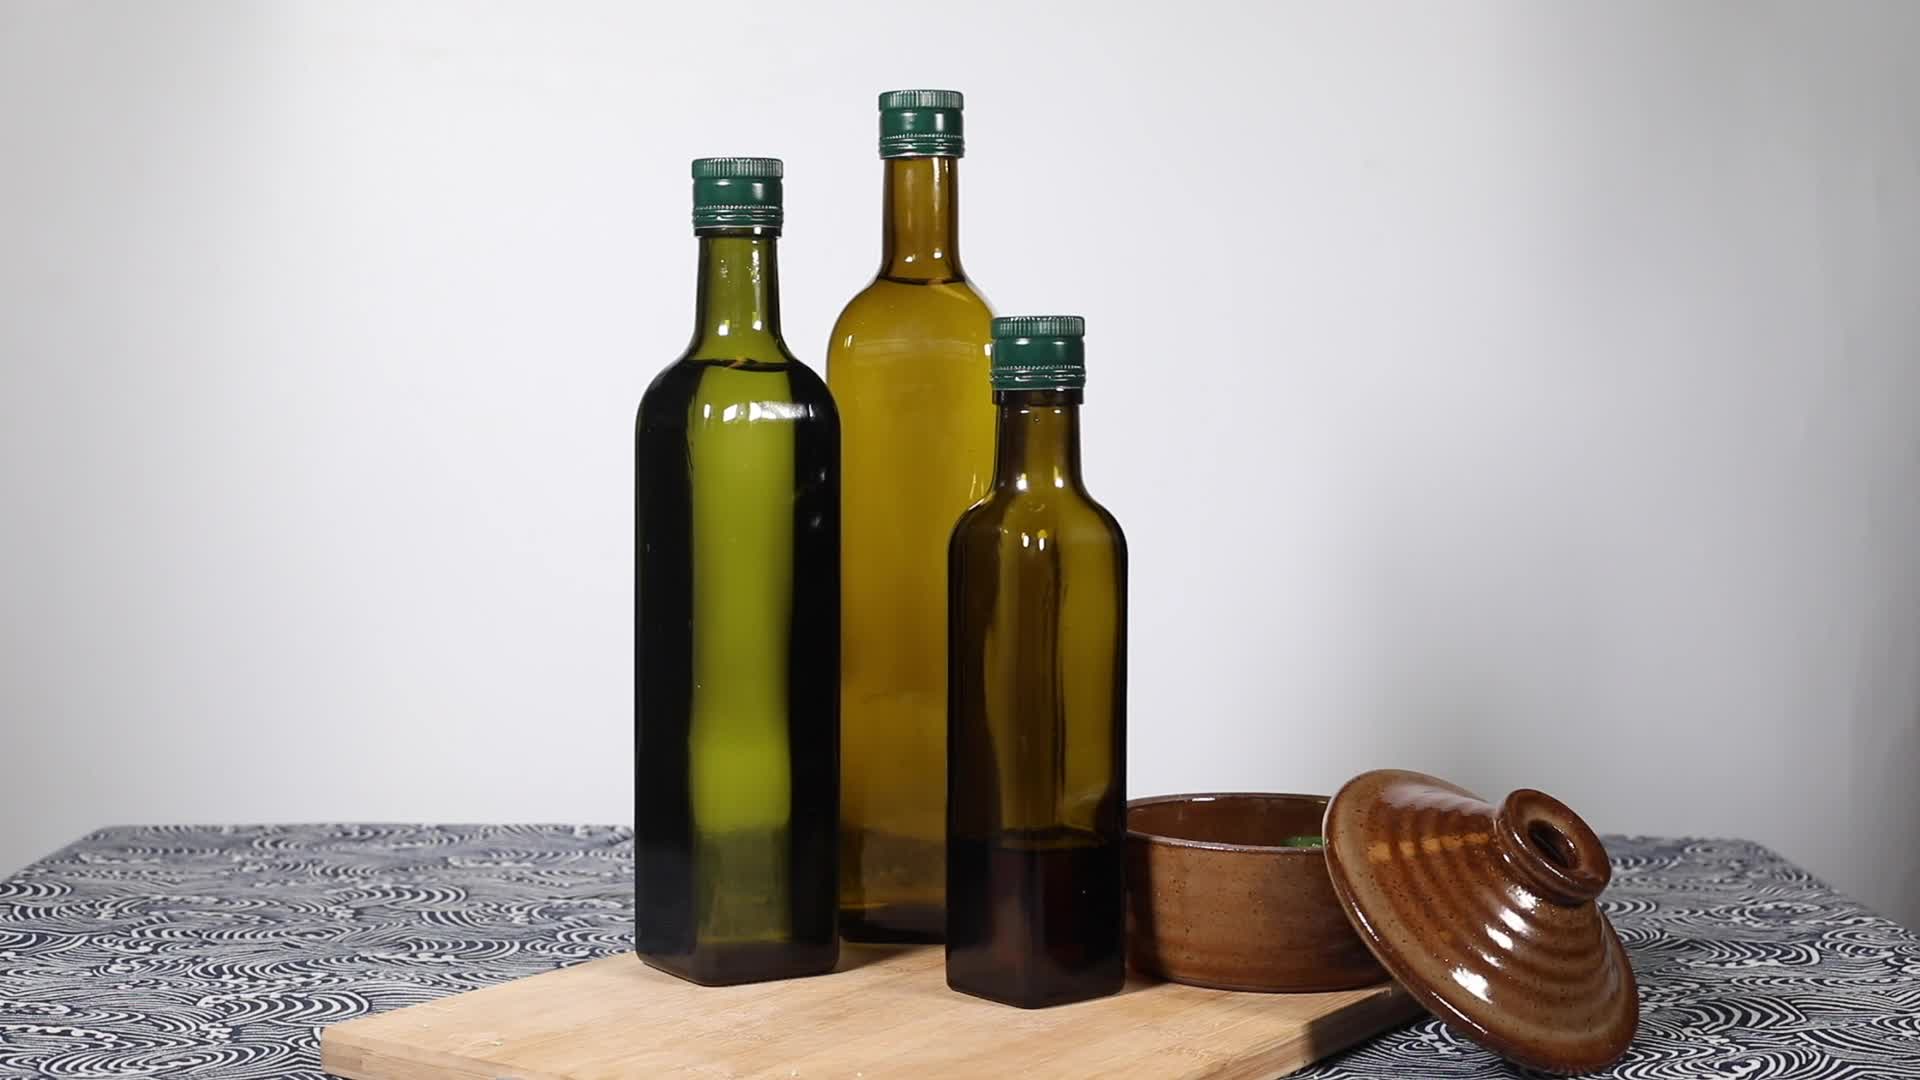 Can olive oil be stored in the refrigerator?